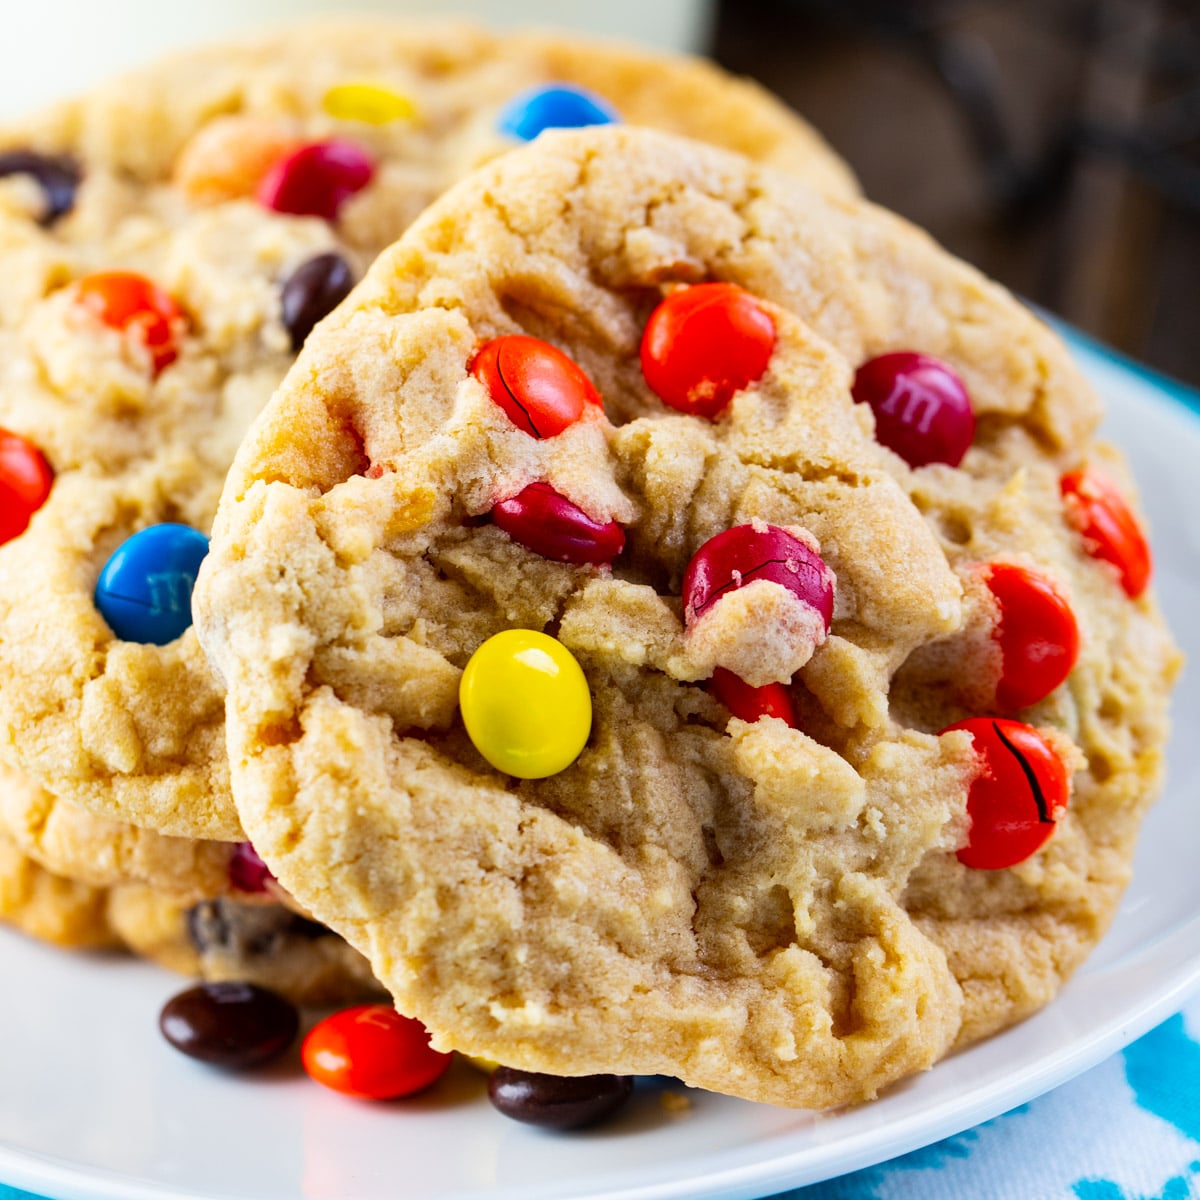 Soft and Chewy M&M Cookies on a plate.